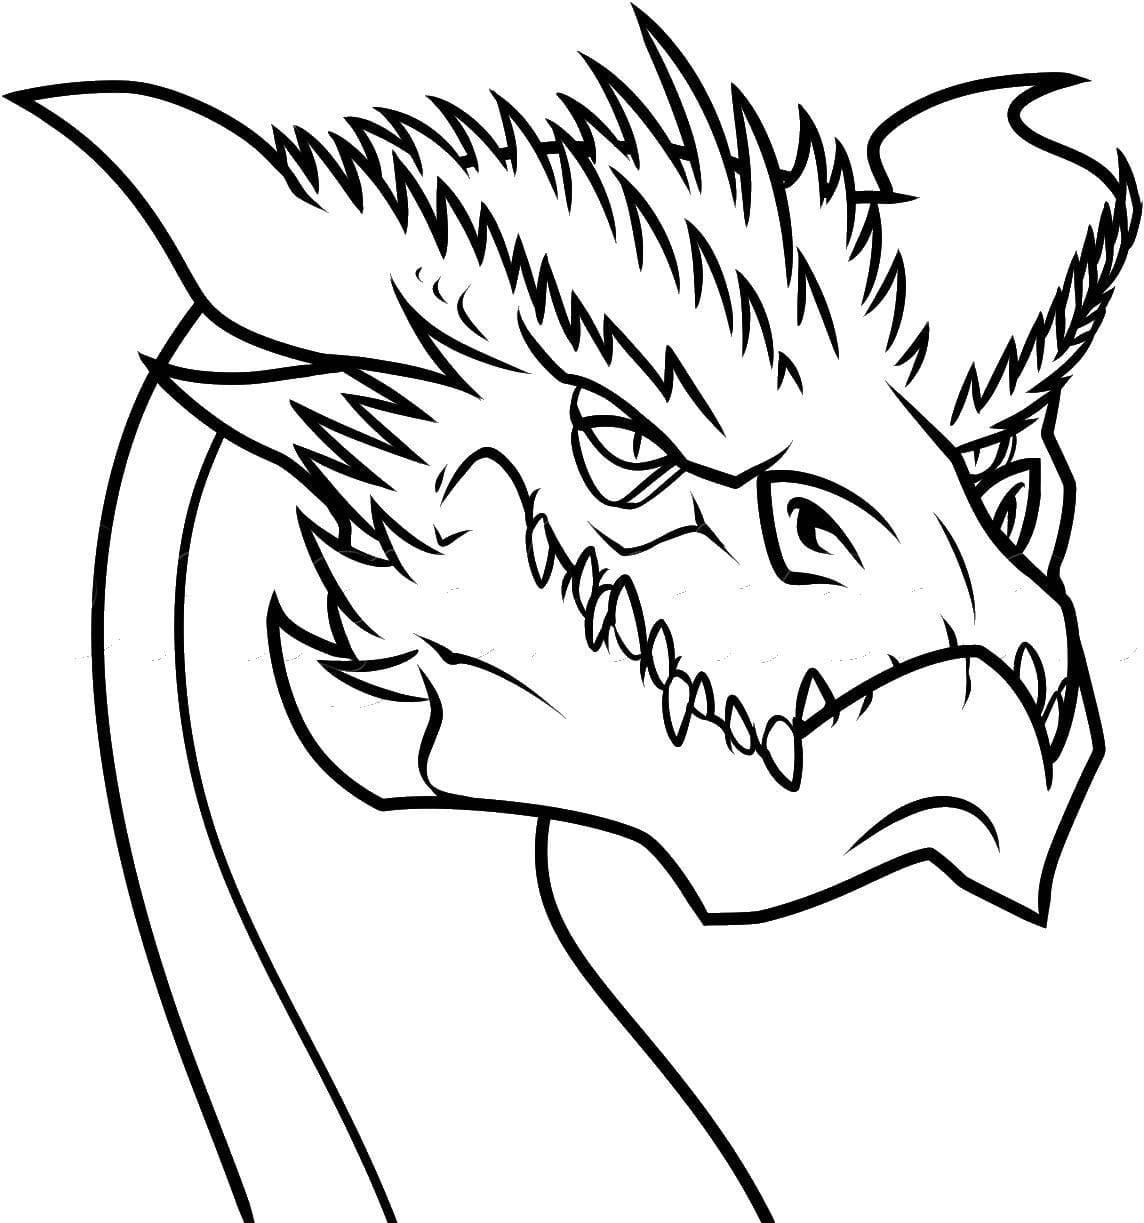 Lord of the Rings Coloring Pages | 110 Pictures Free Printable